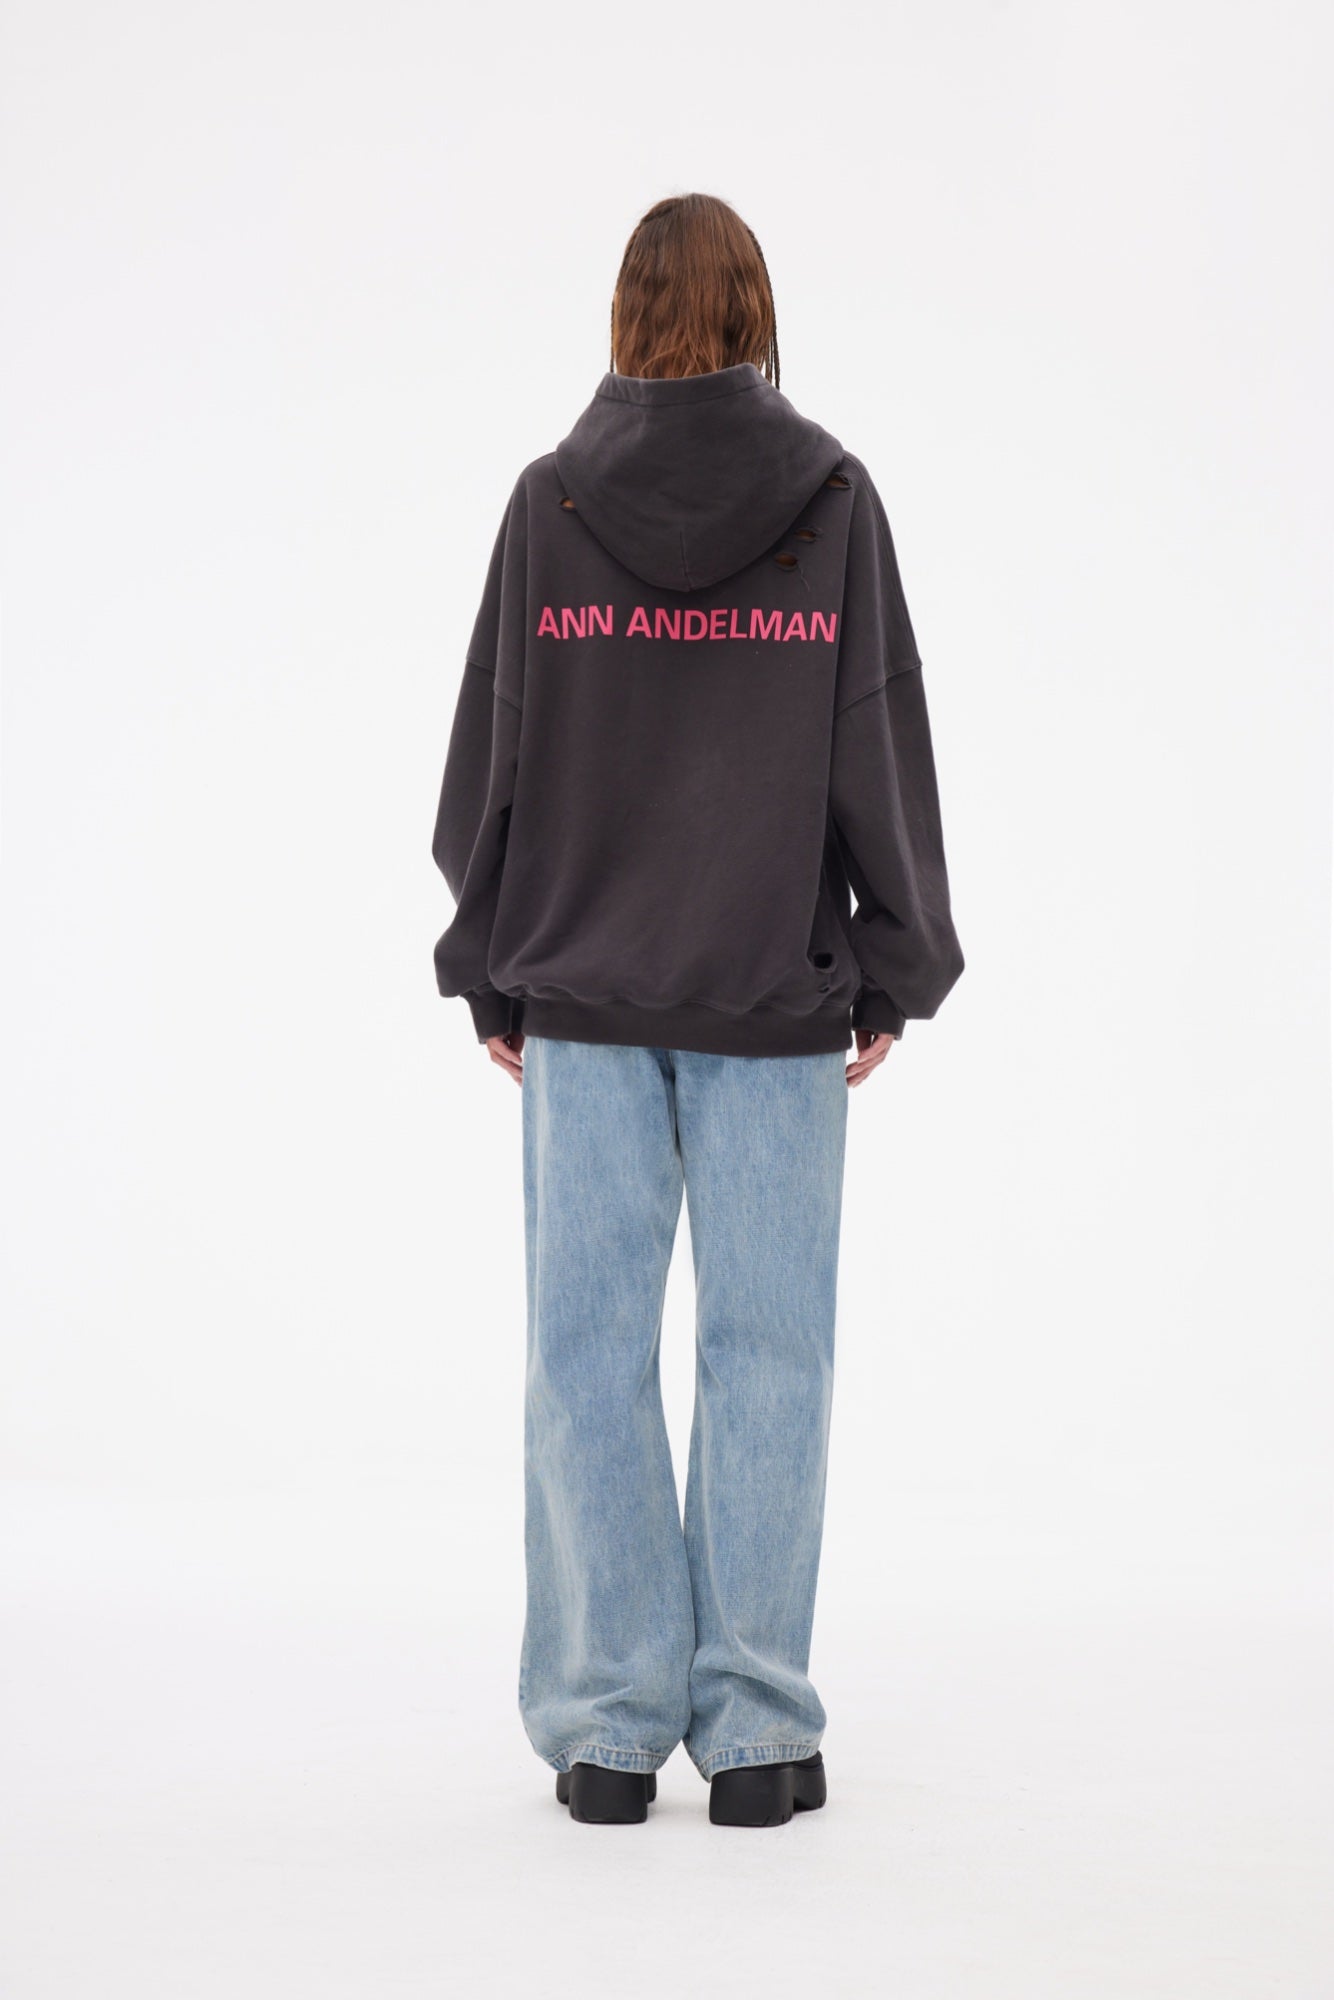 ANN ANDELMAN Limited Color Hoodie Grey | MADA IN CHINA